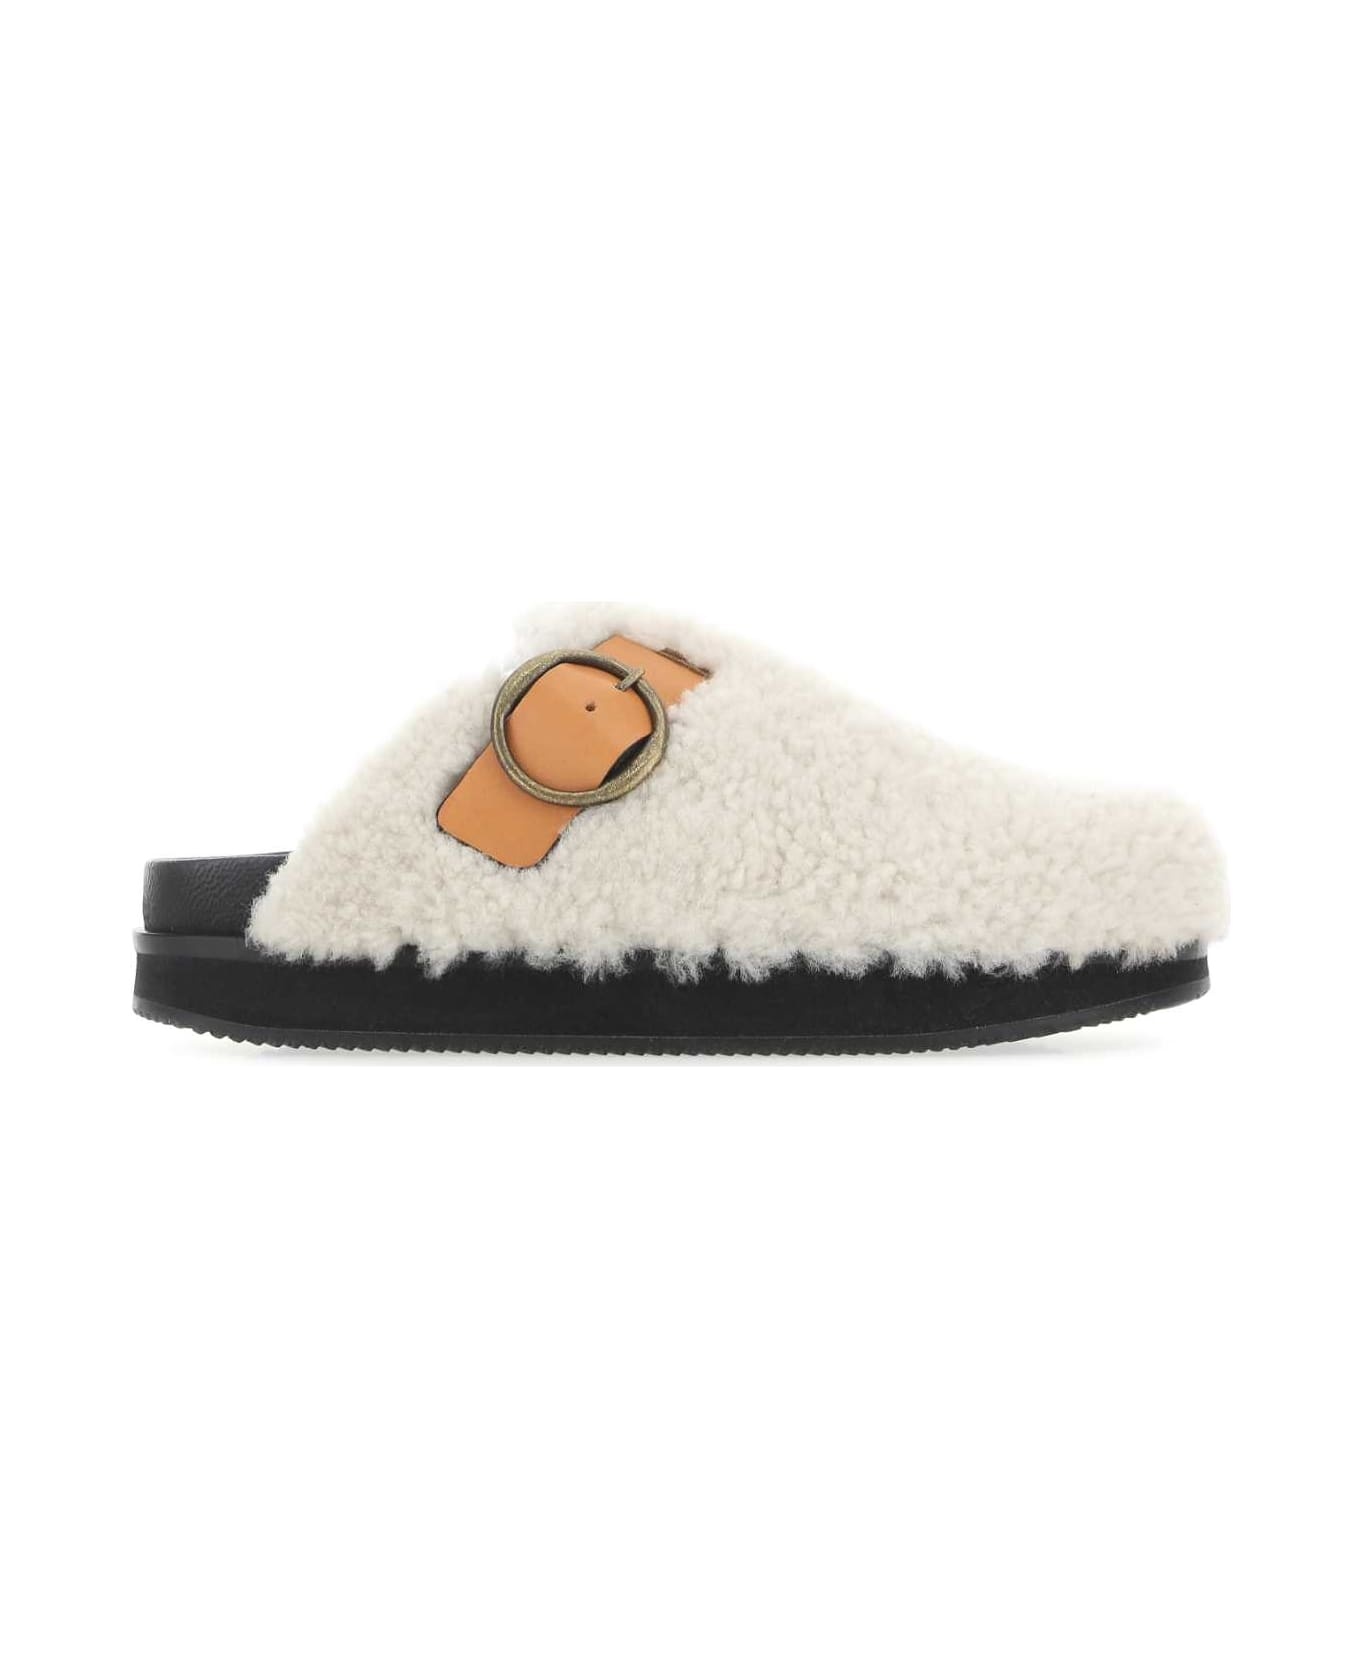 Ivory Shearling Footb Slippers - 1